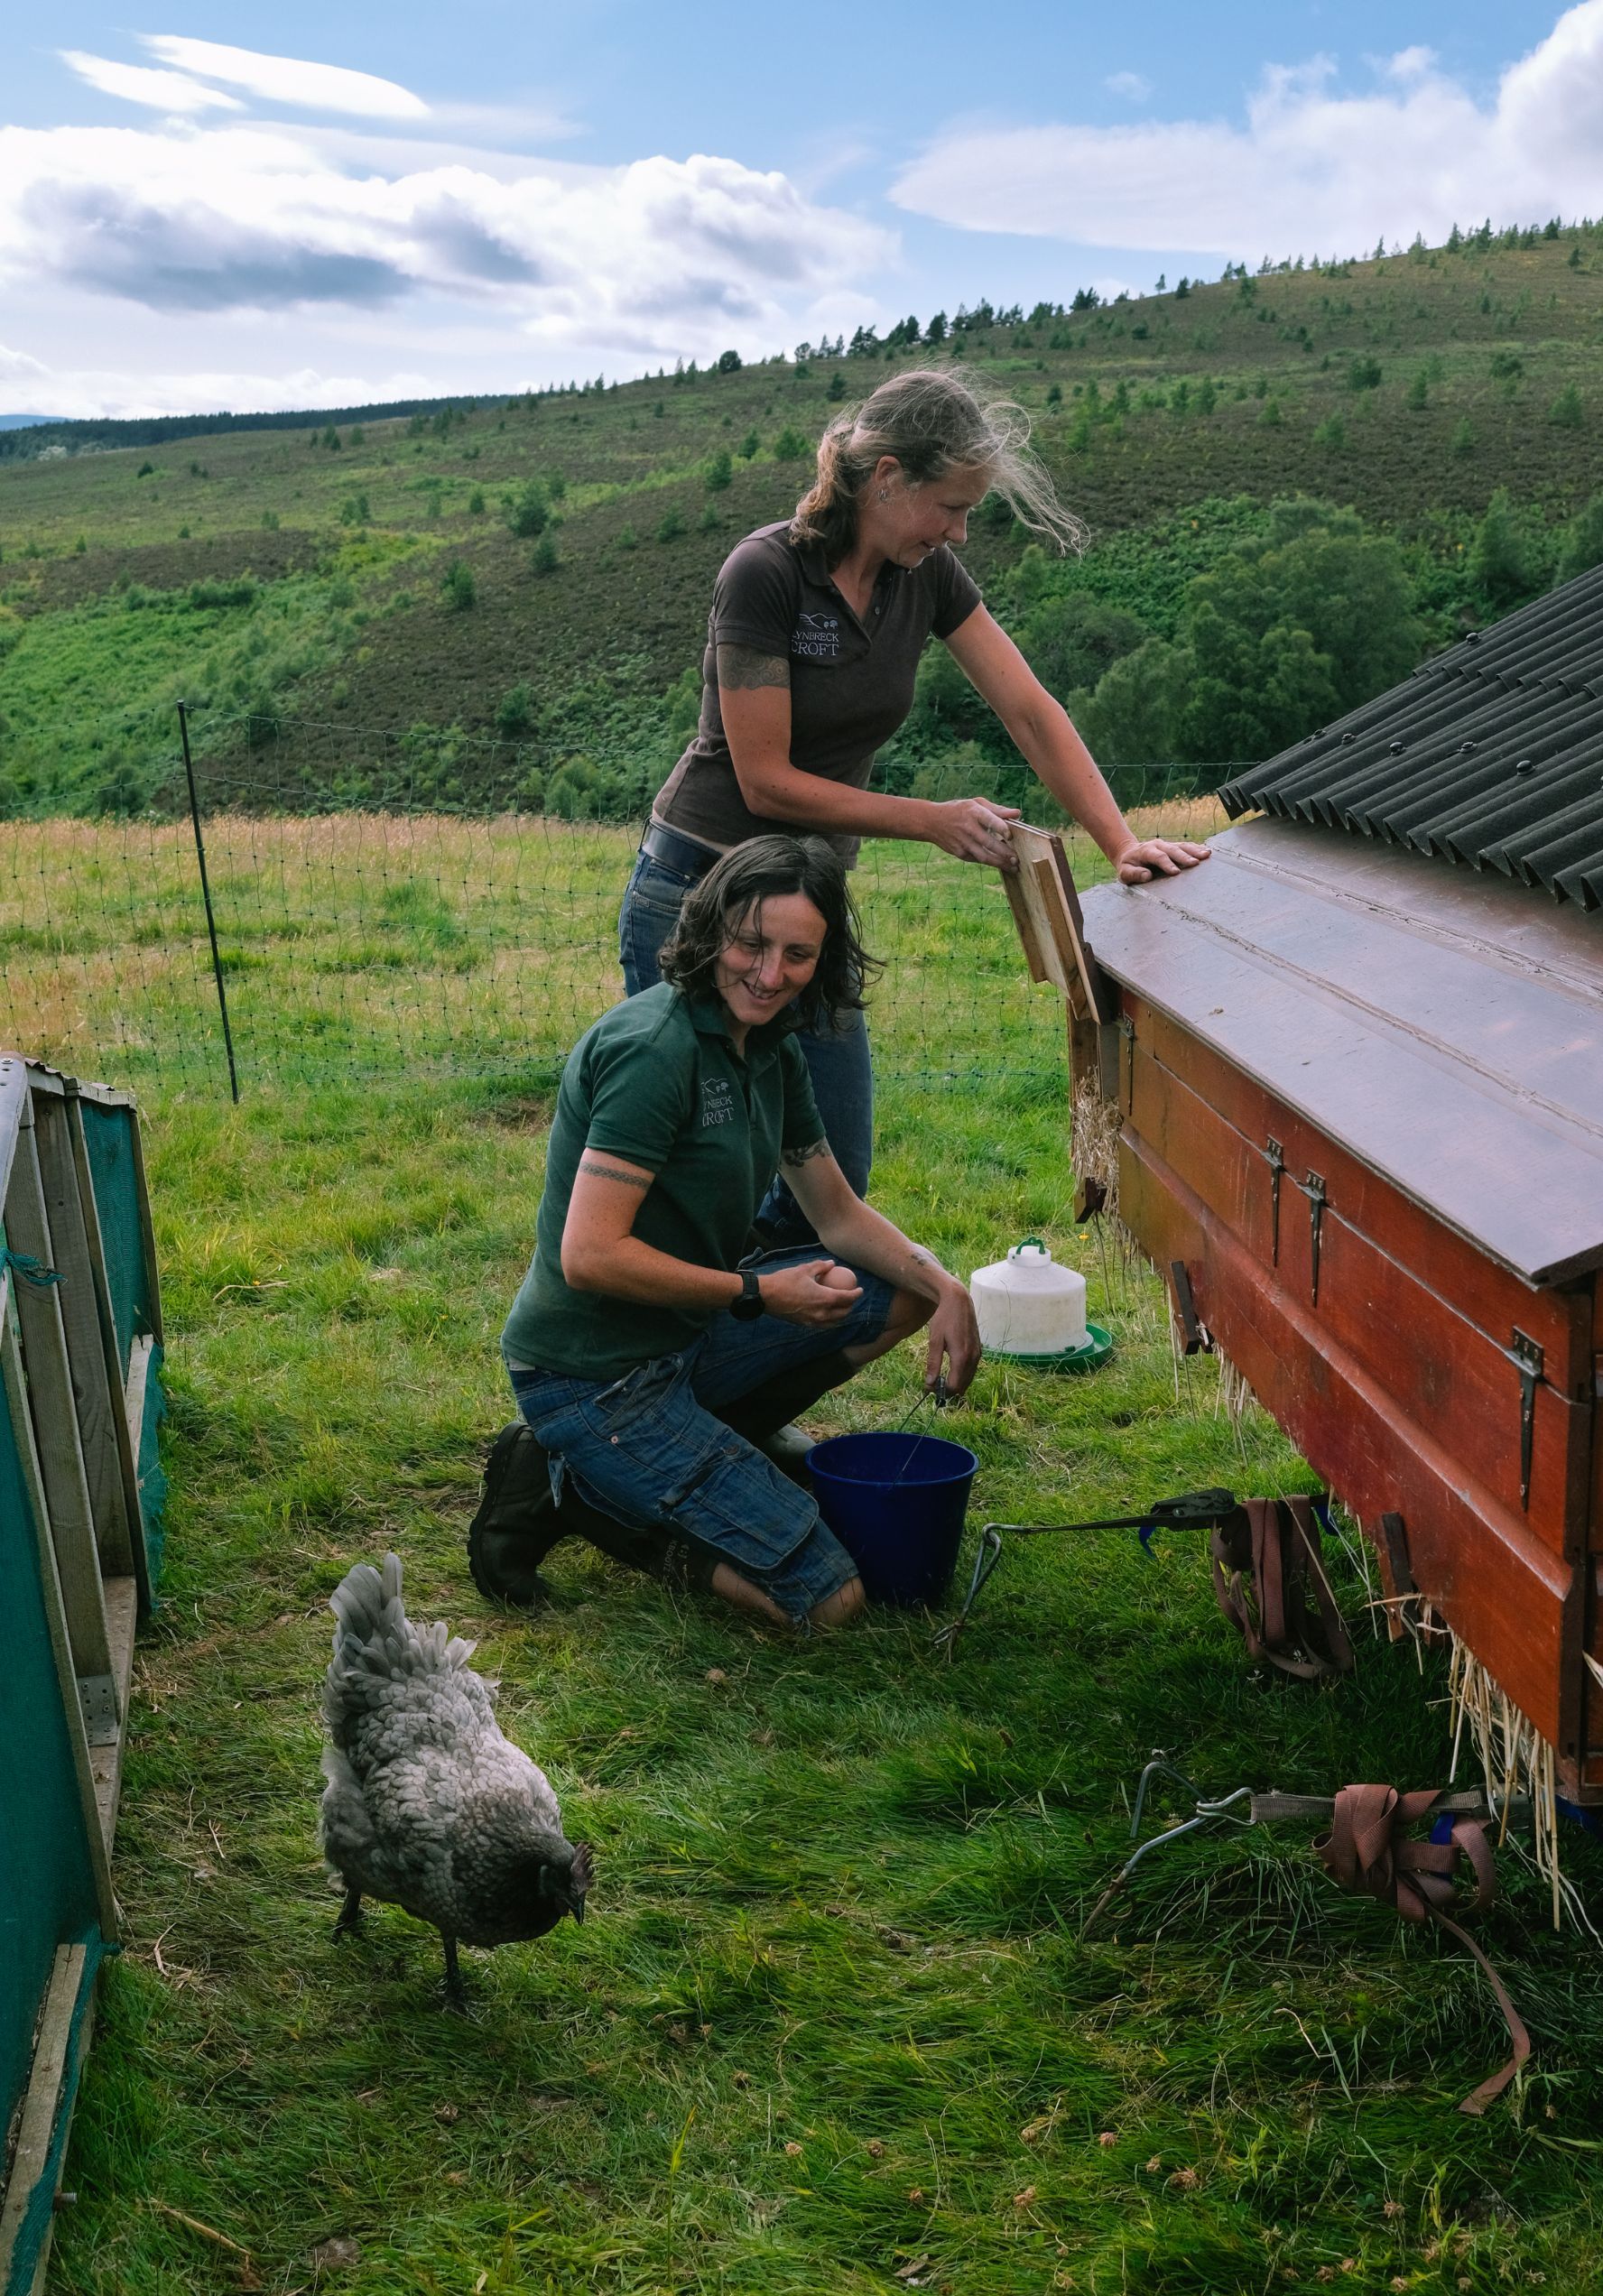 Sandra Baer and Lynn Cassells look after hens on their croft in the Scottish Highlands.